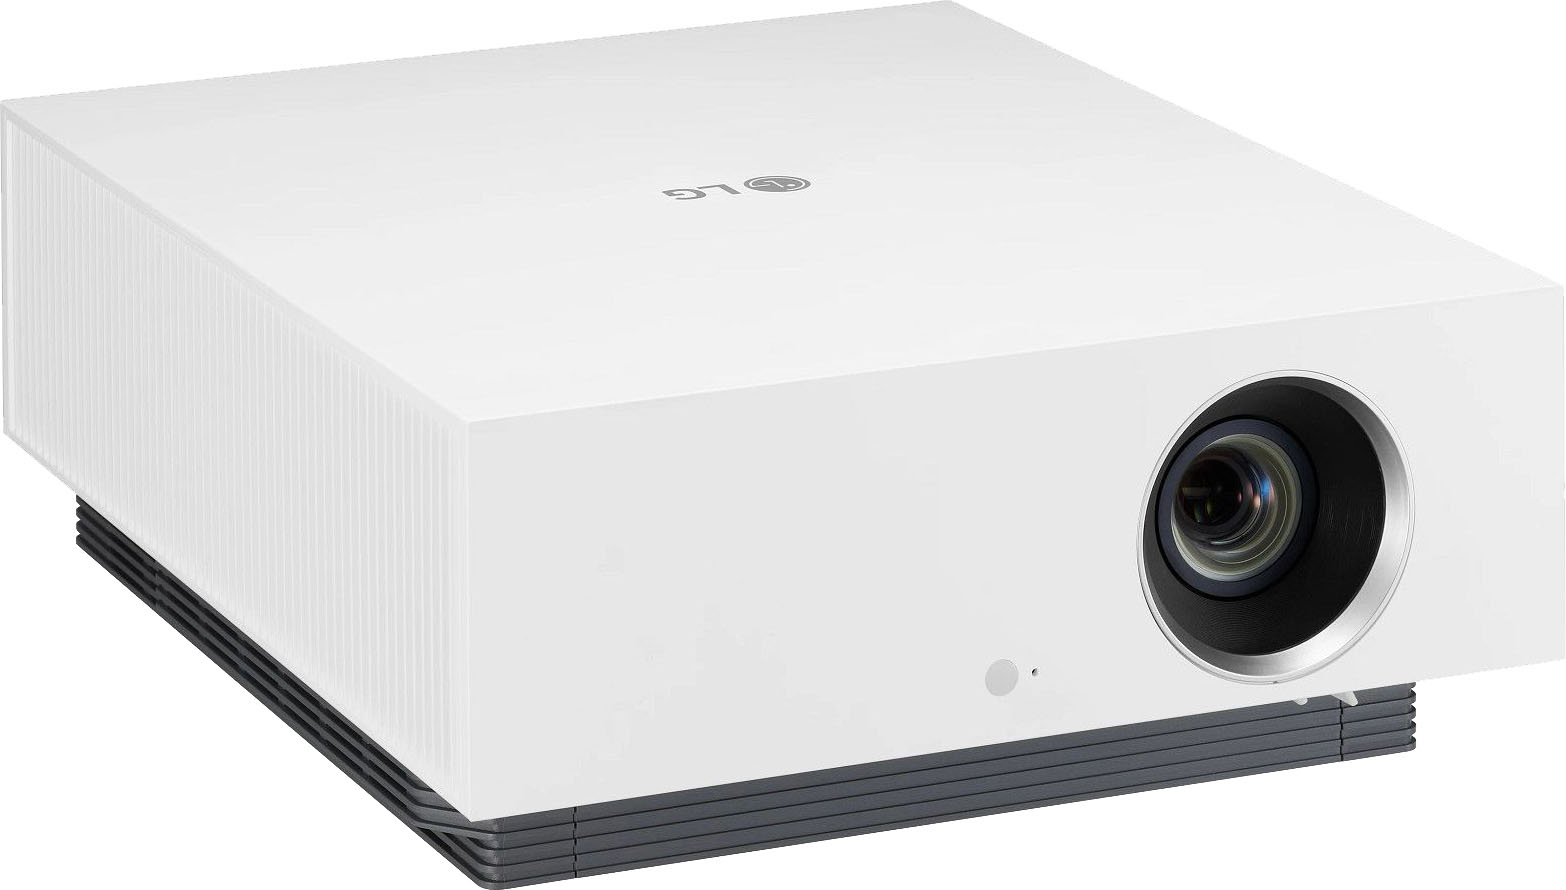 Angle View: CineBeam Dual Laser Streaming 4K UHD Smart Portable Projector with LG webOS and HDR10 - White